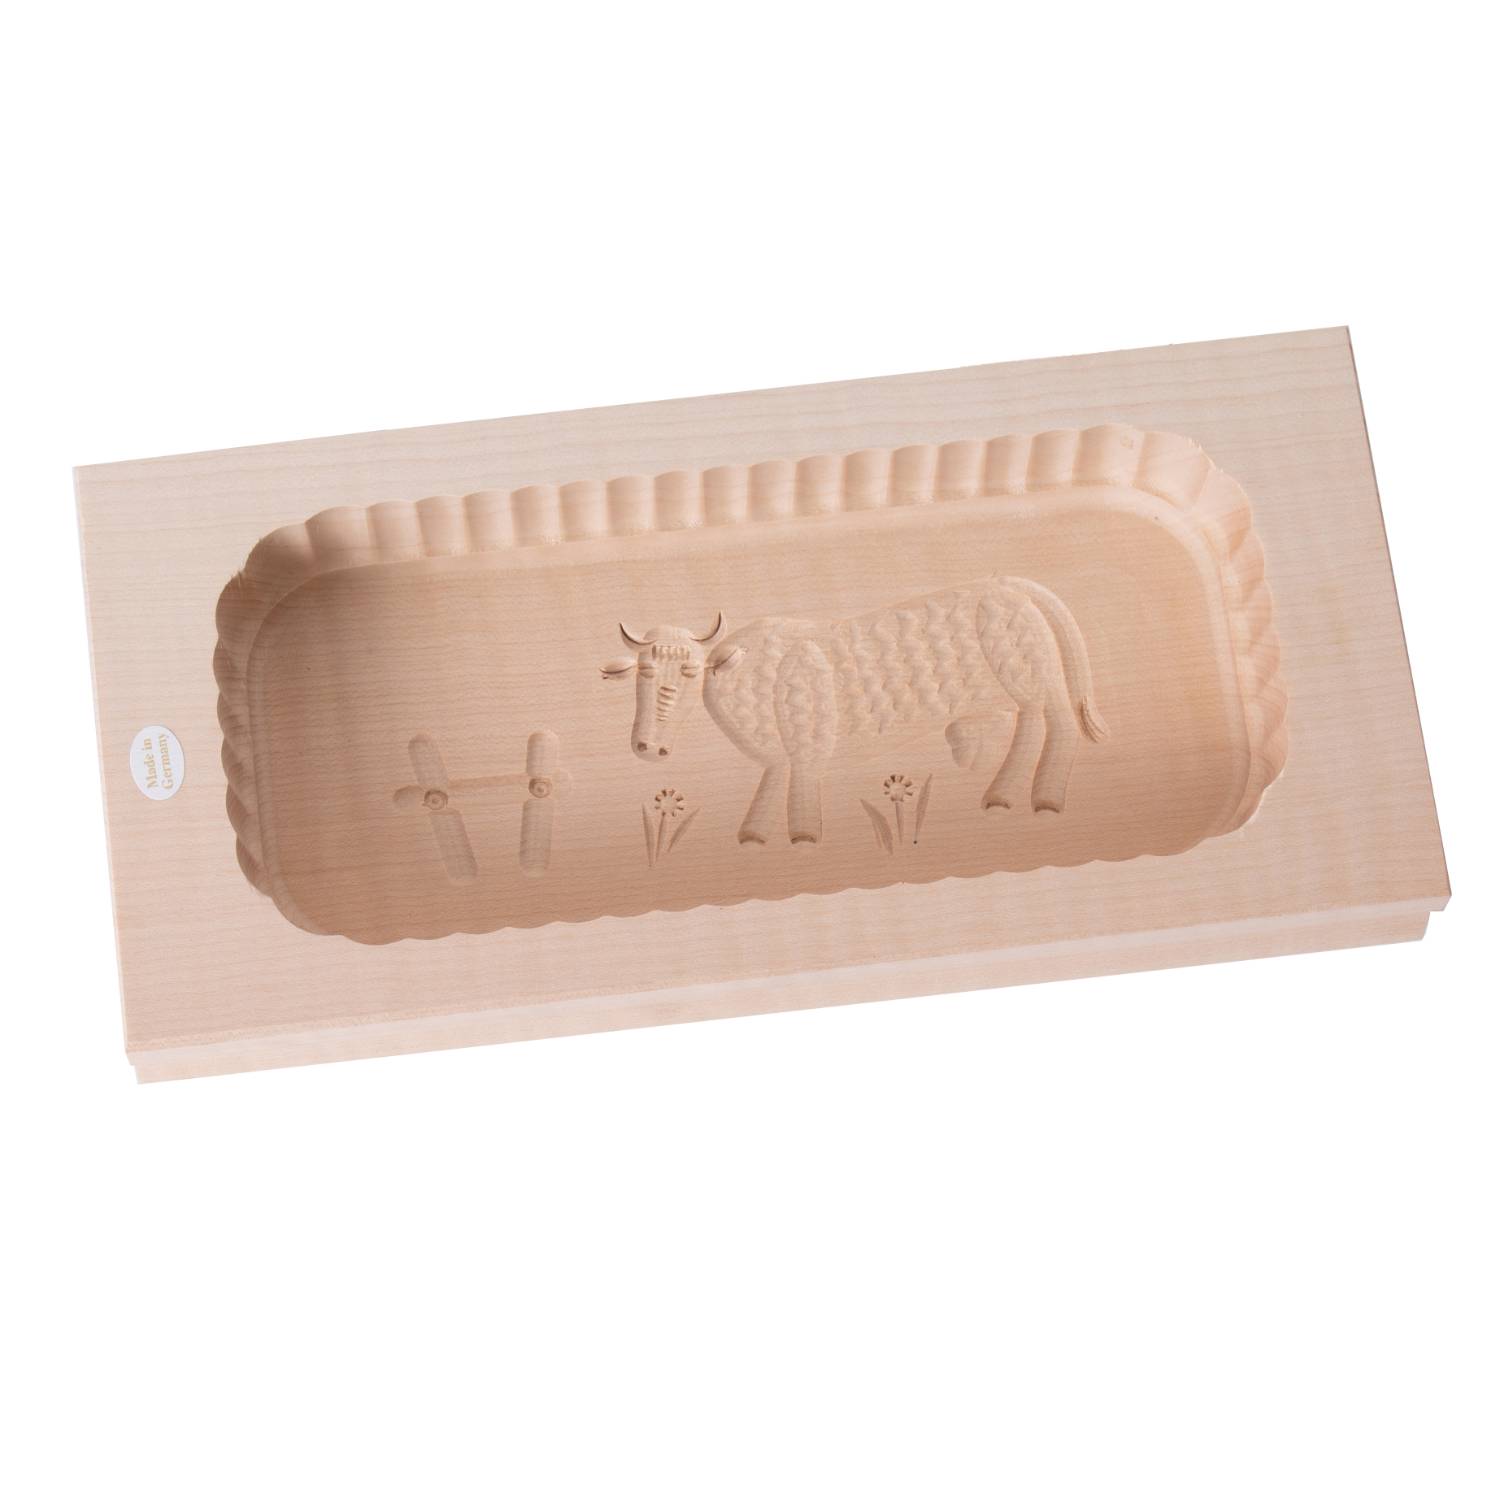 Lehman's Hard Carved Wooden Rectangular Butter Mold Assorted Patterns Large 1 Pound, Size: One size, Brown